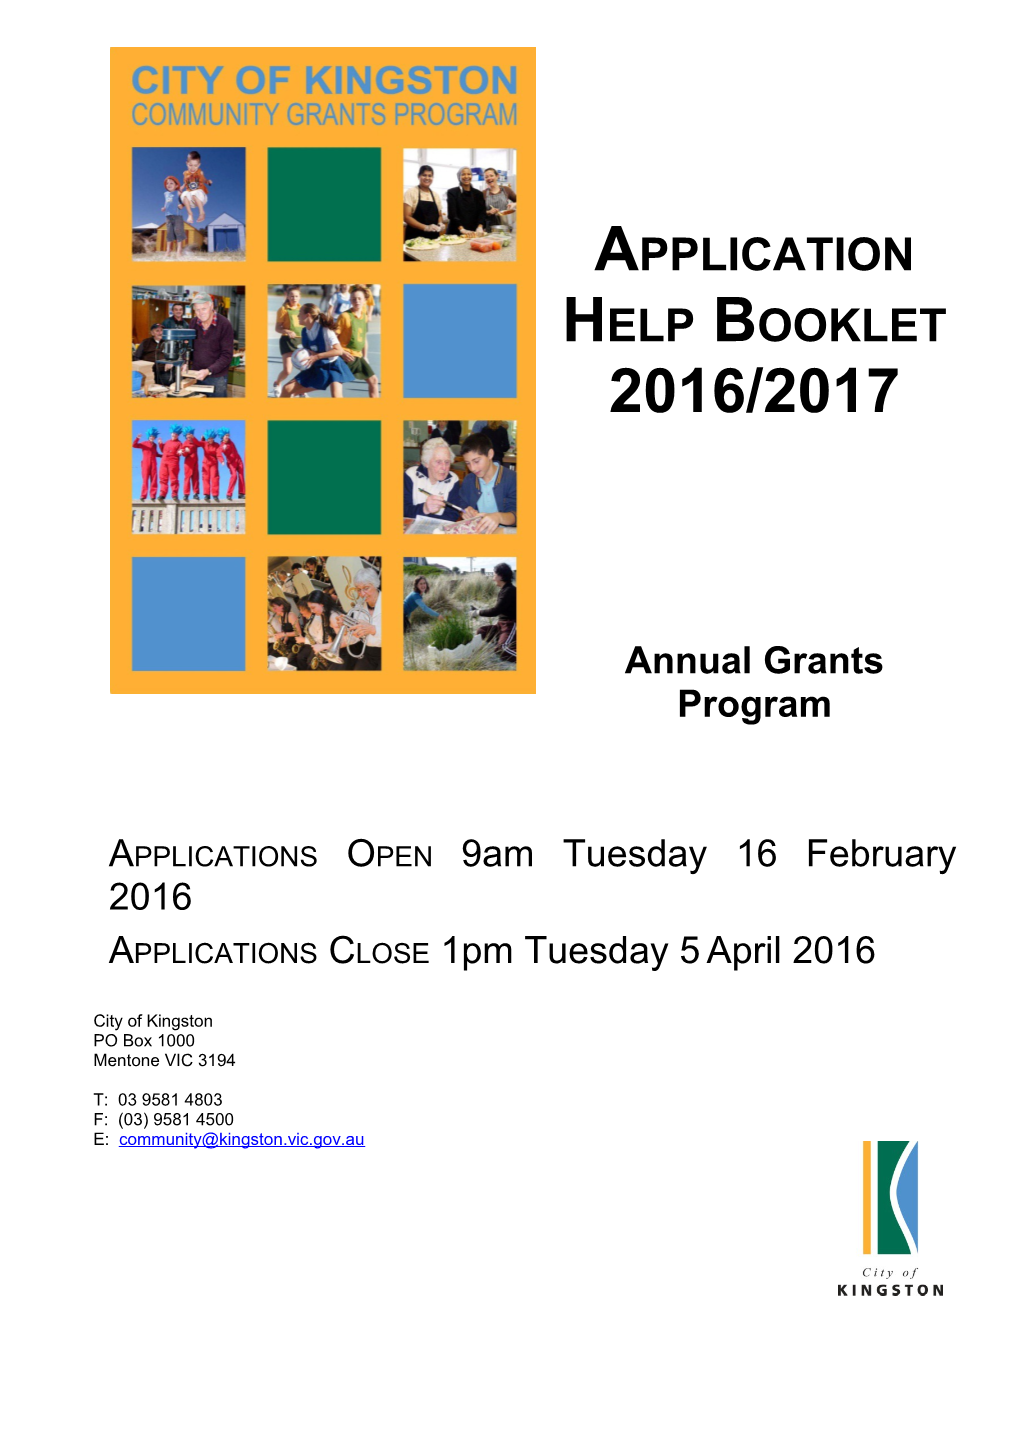 Application Help Booklet